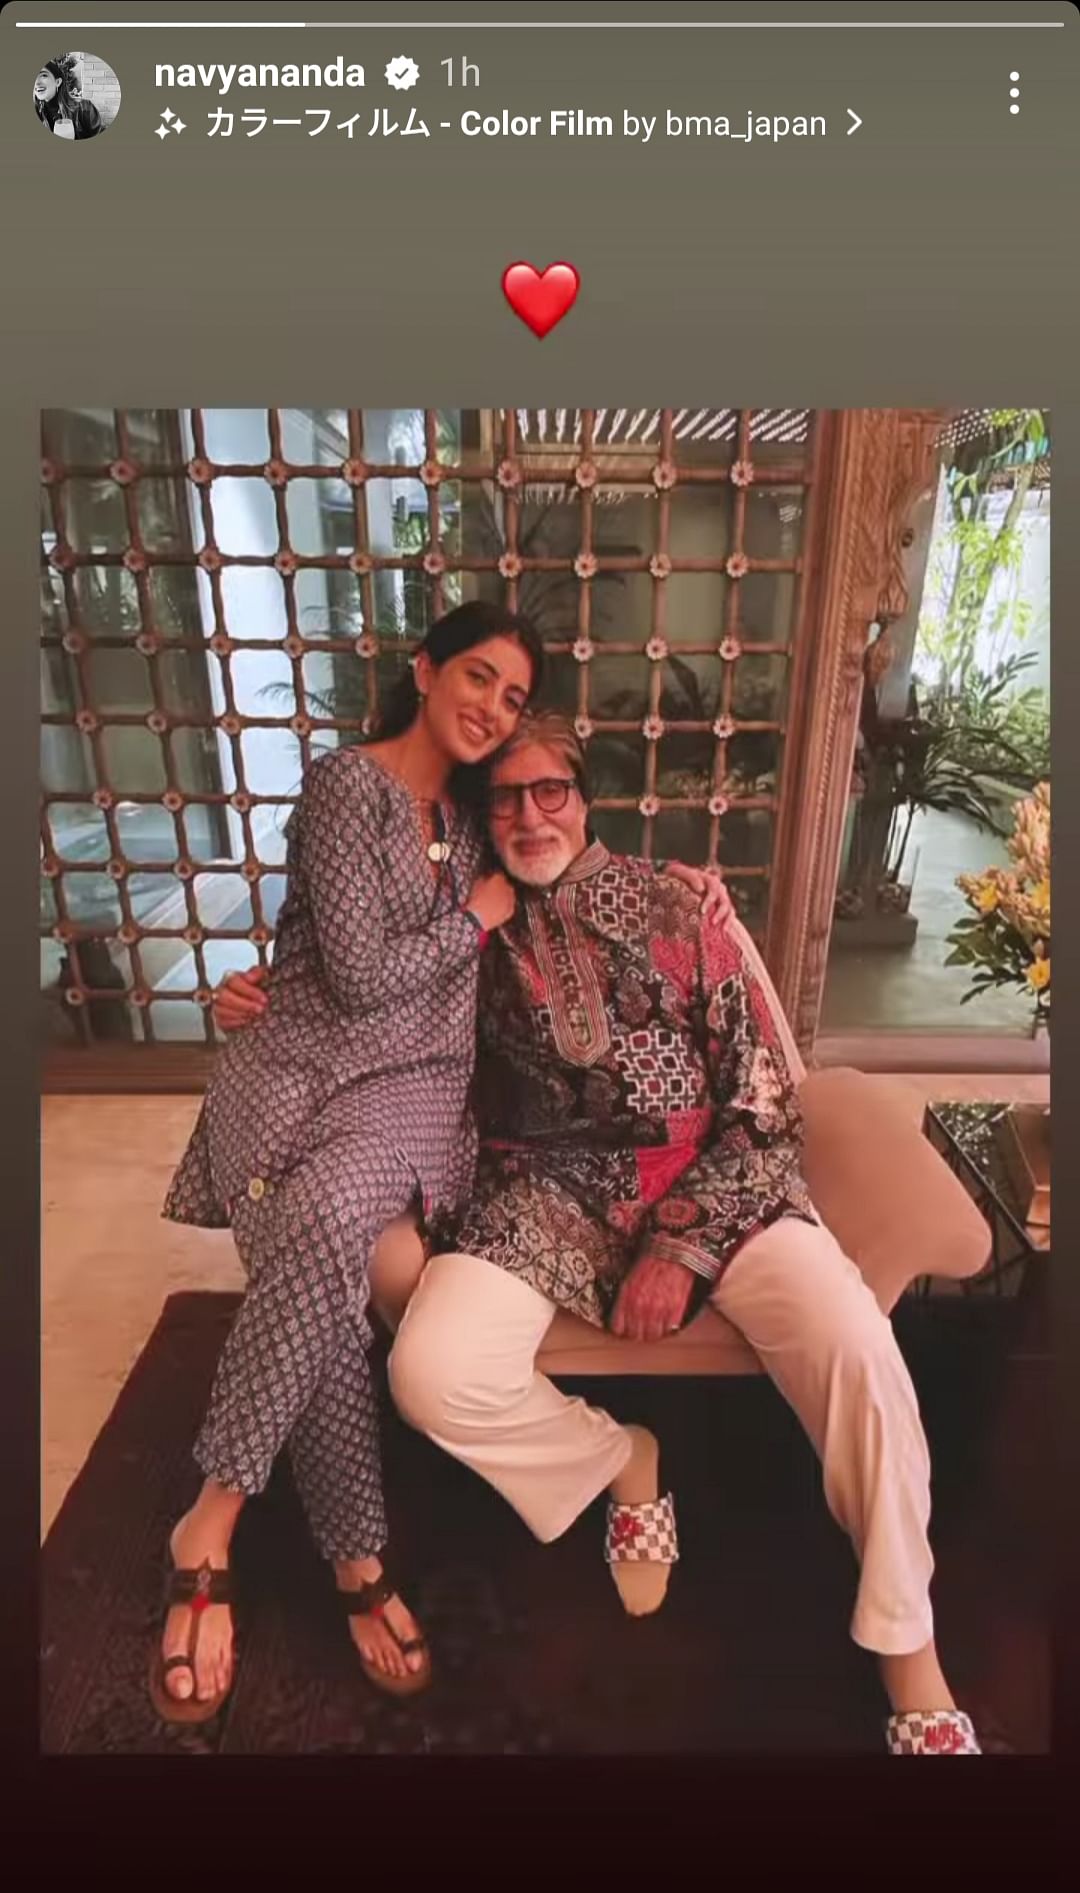 Big B celebrated his 80th birthday with a cozy family dinner.